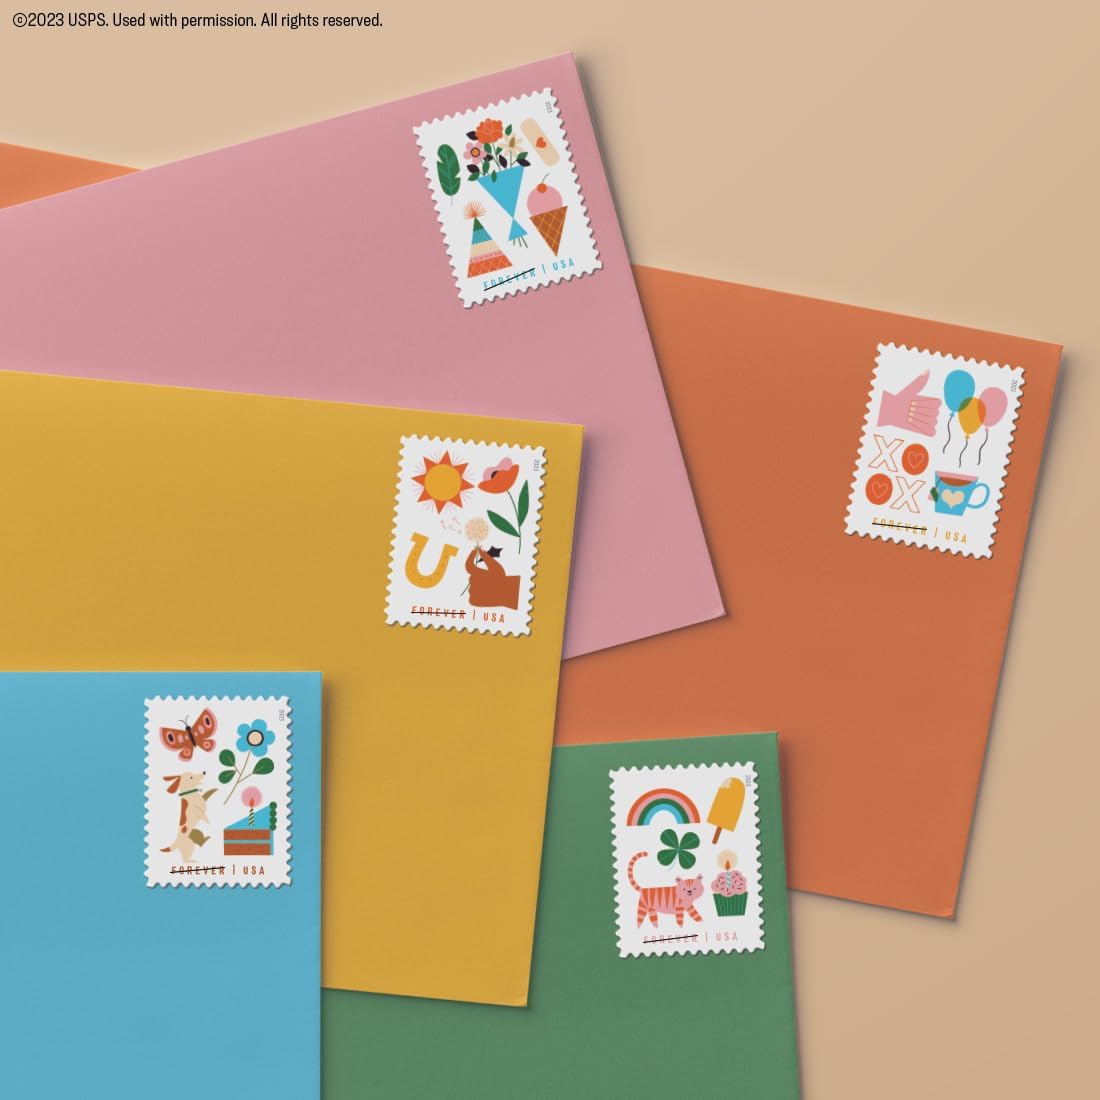 2023 Thinking of You Postage Forever Stamp US First Class Letter Card